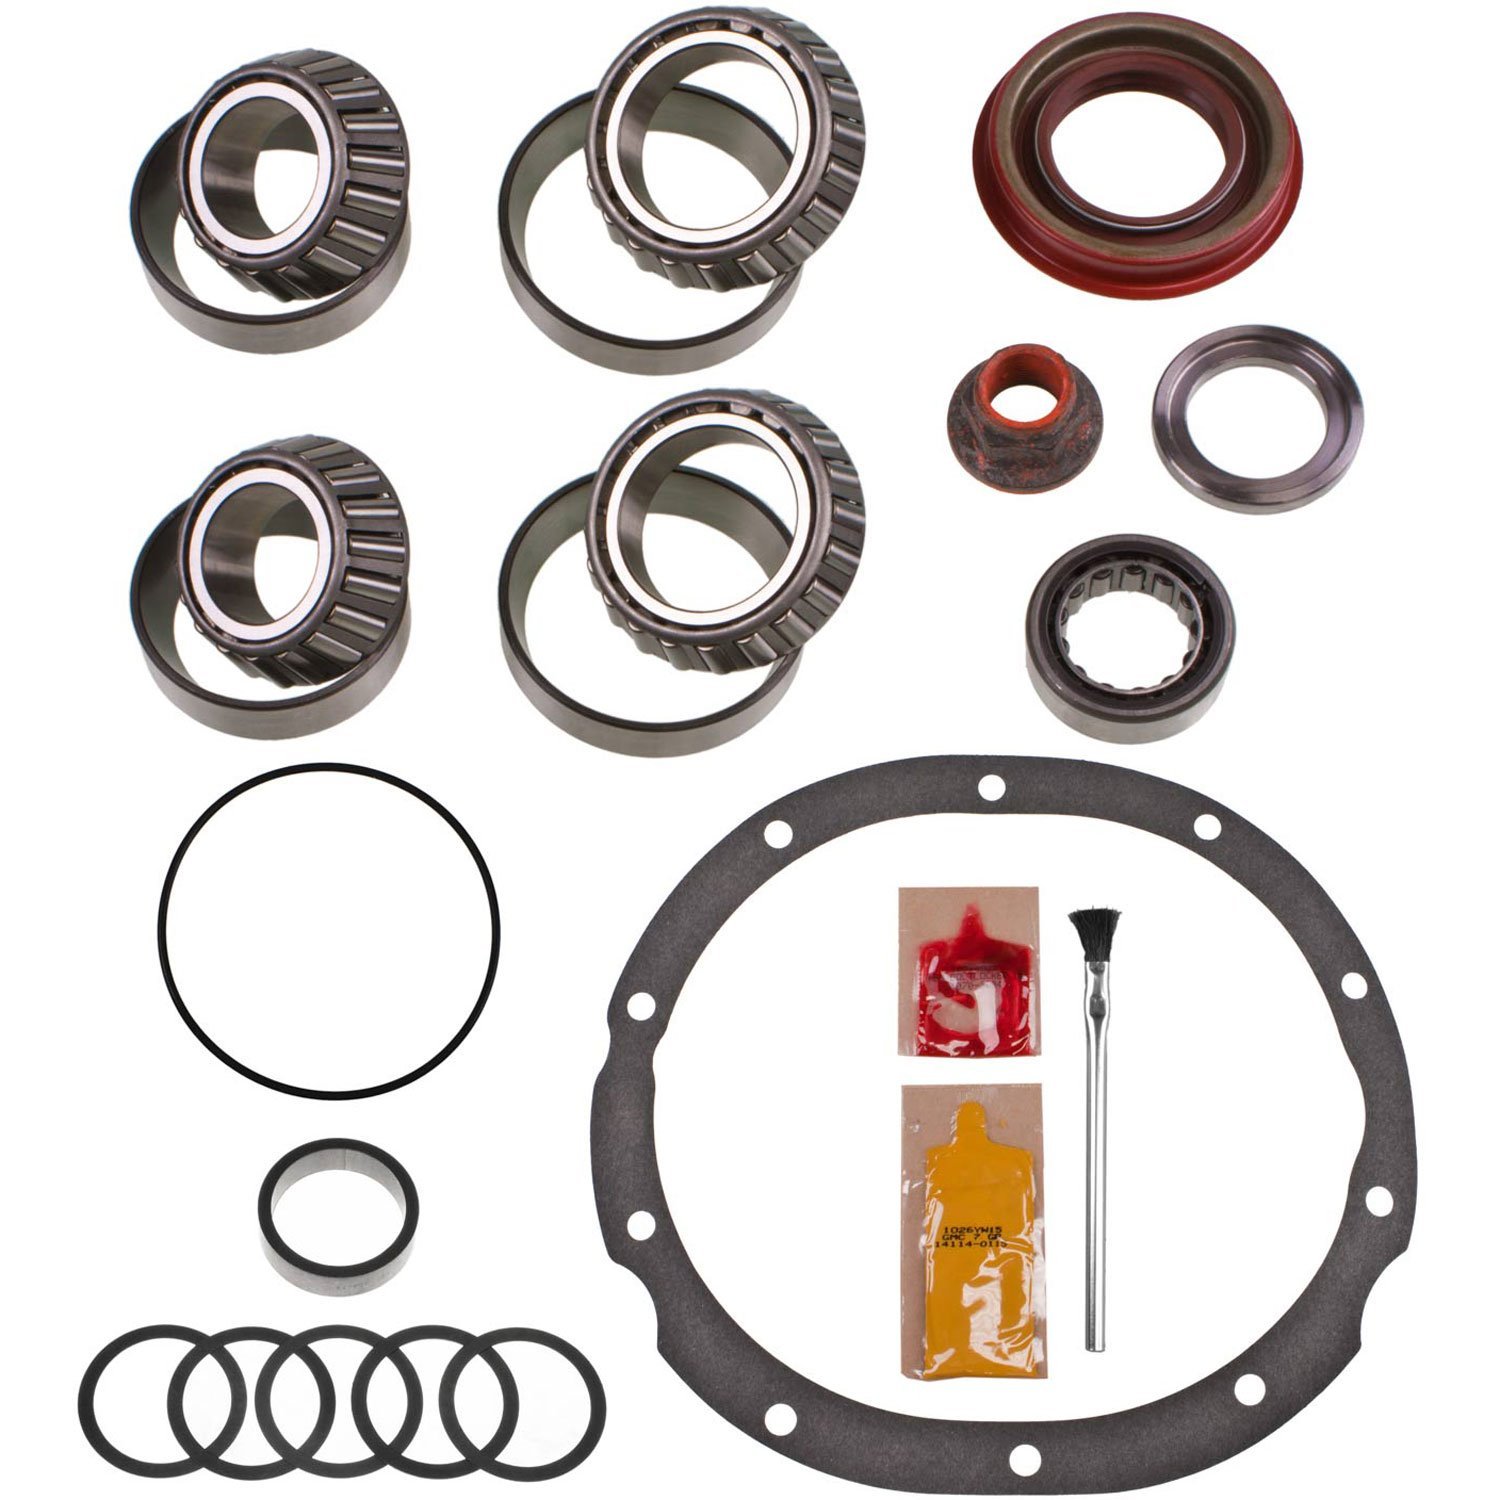 Differential Bearing Kit Ford 9 in. 14-bolt - Timken Bearings